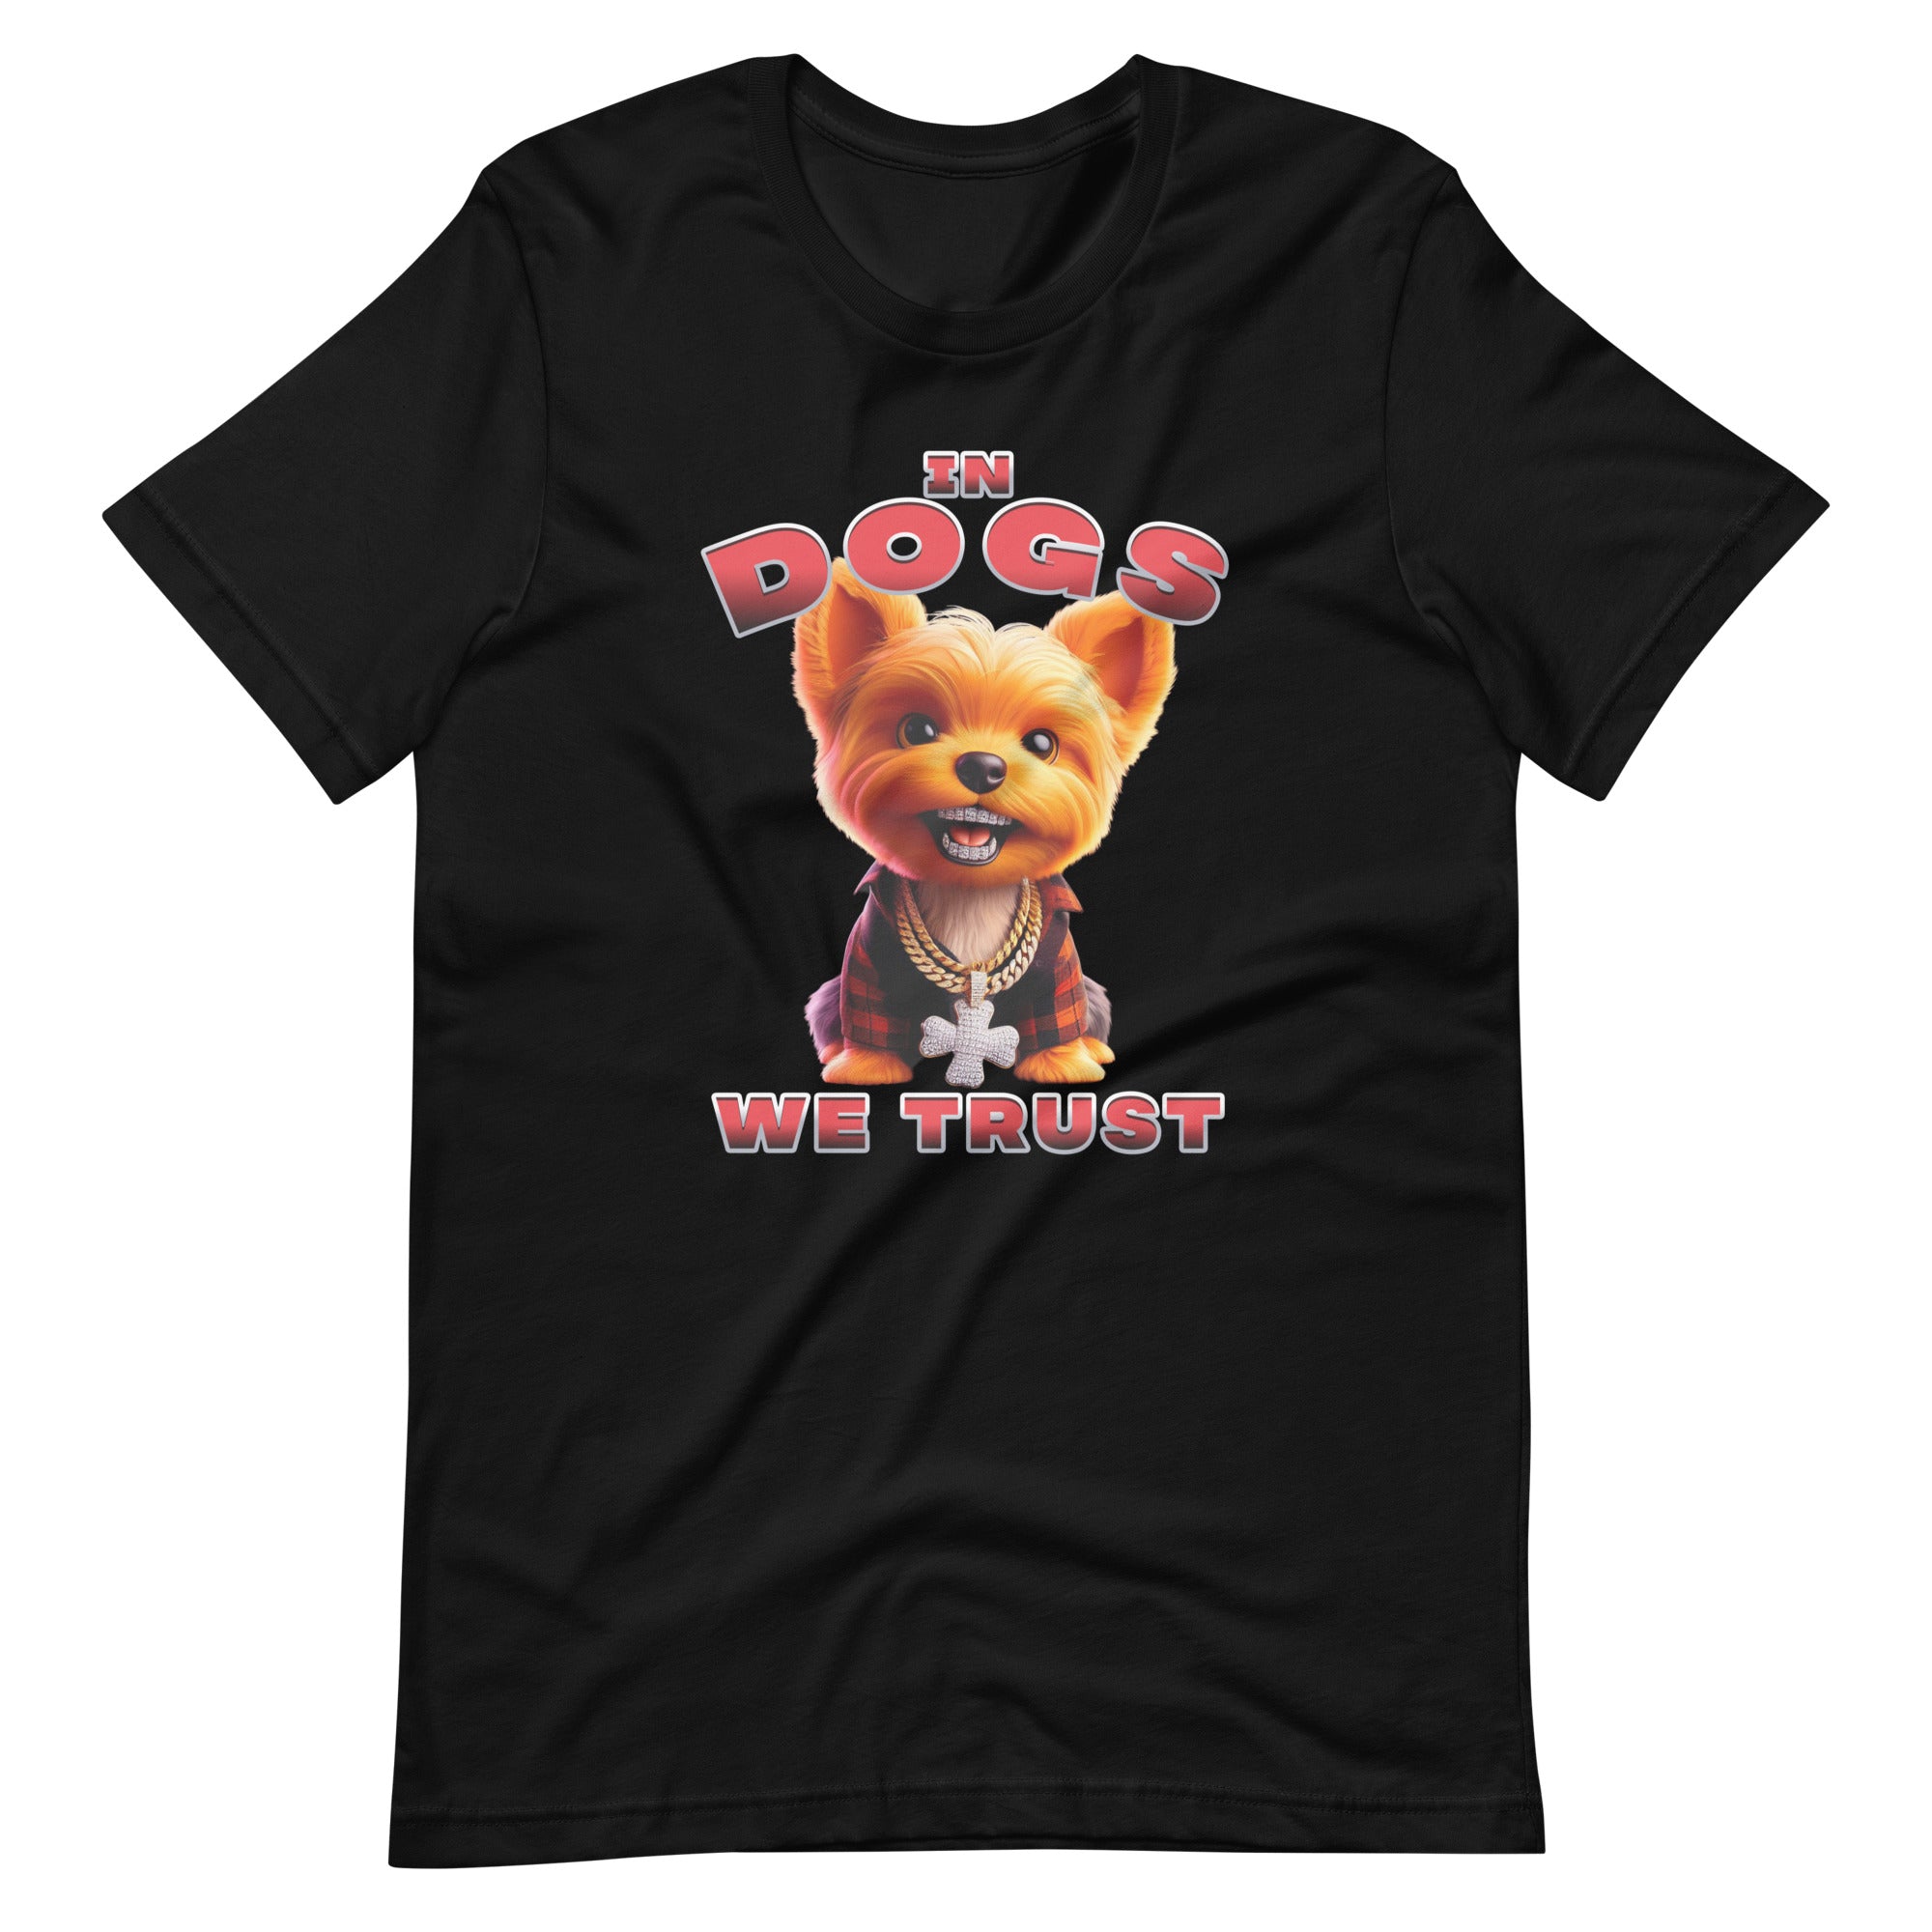 "In Dogs We Trust" T-shirt - Yorkshire Terrier